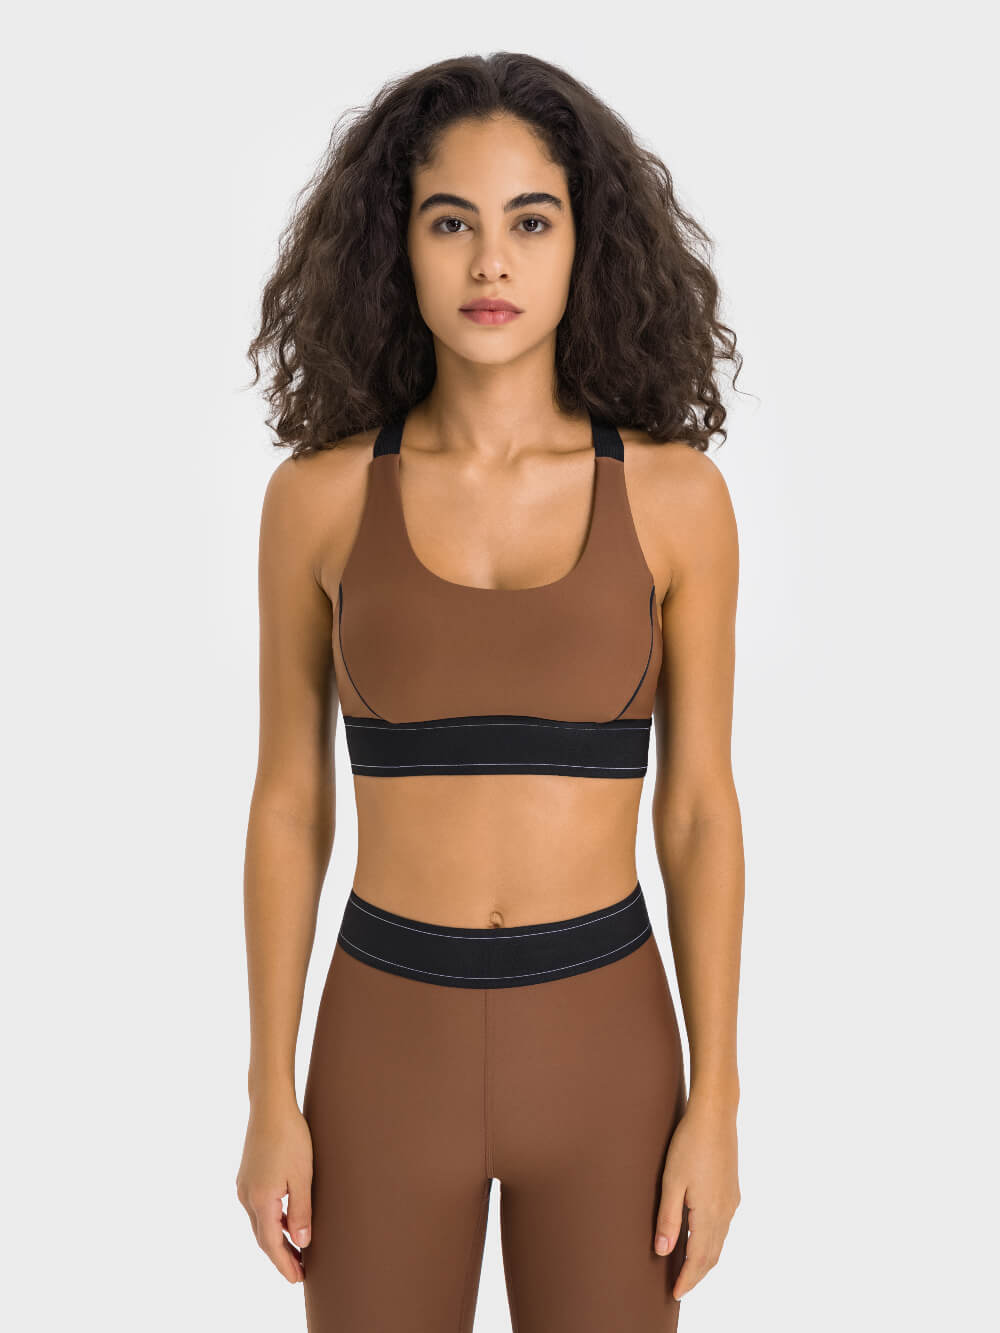 Yarn Fabric Bra Tops For Yoga: L 349 PA66 U Neck Bra With Nude Sense Tank  Top, X Shaped Super Wide Strap, Soft Sports Bra For Women From Wslly104104,  $15.38